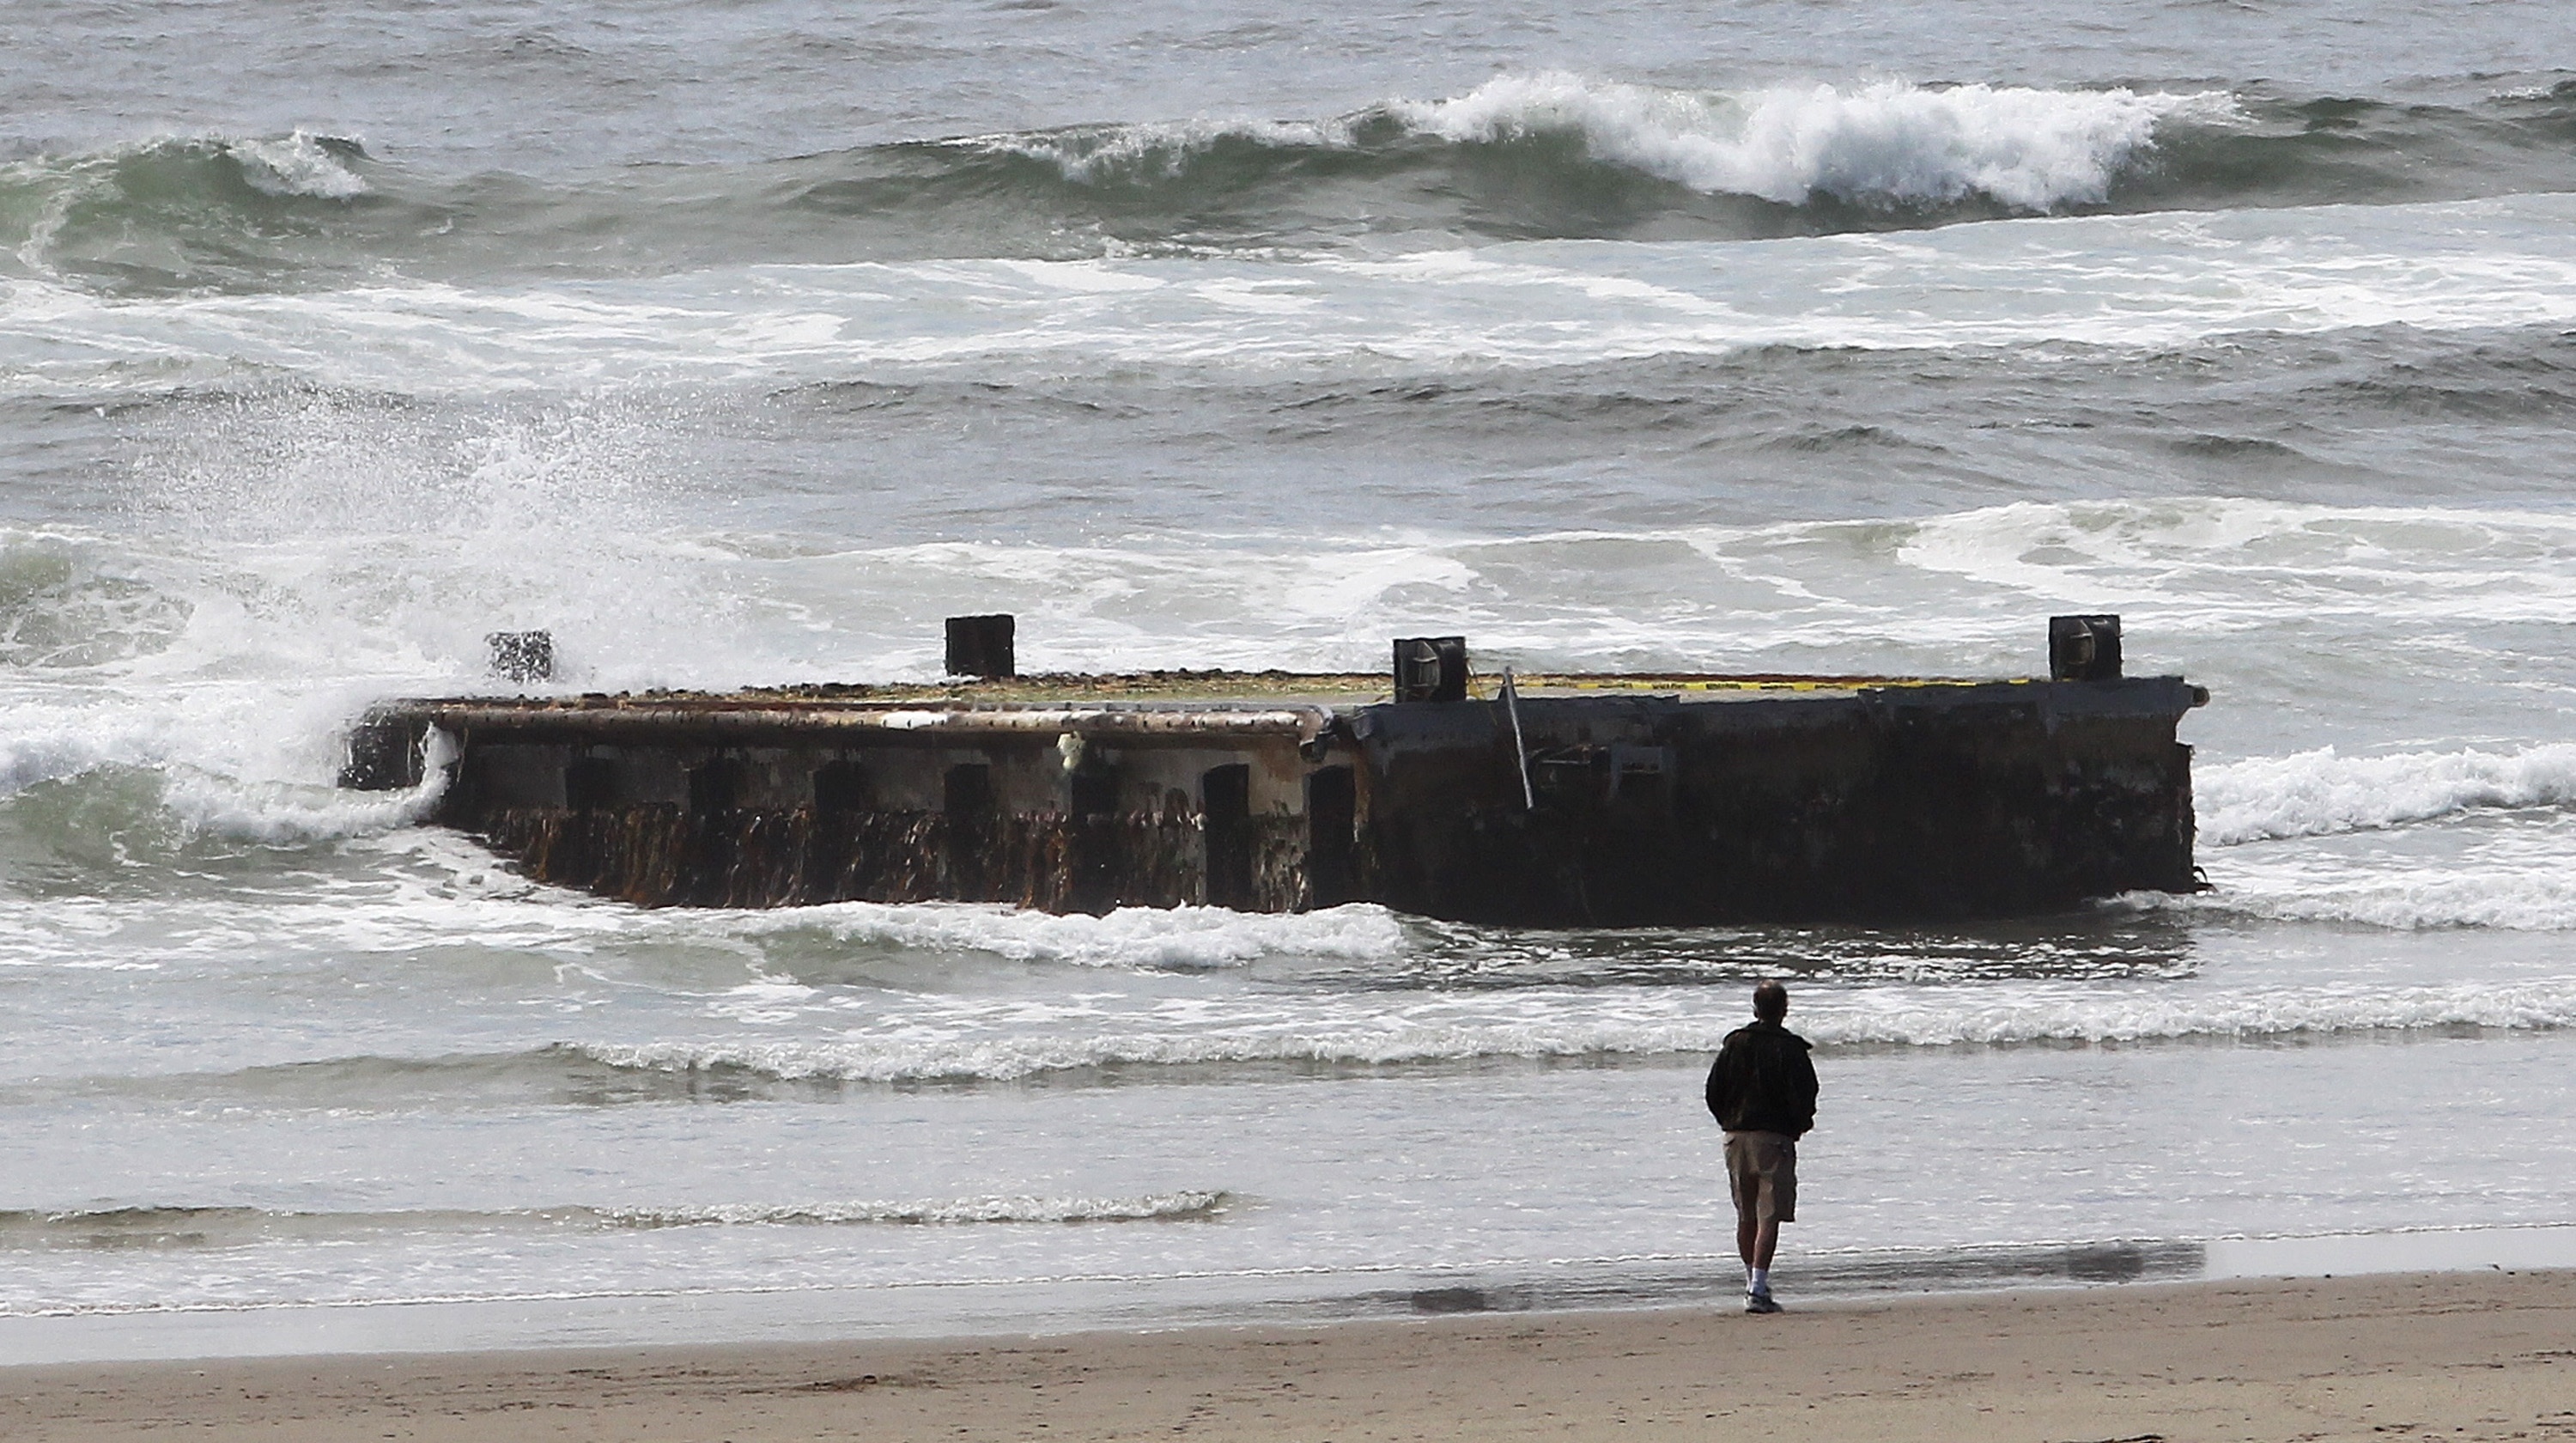 A man looks at the massive dock — a relic from 2011 Japanese tsunami — that washed ashore near Newport